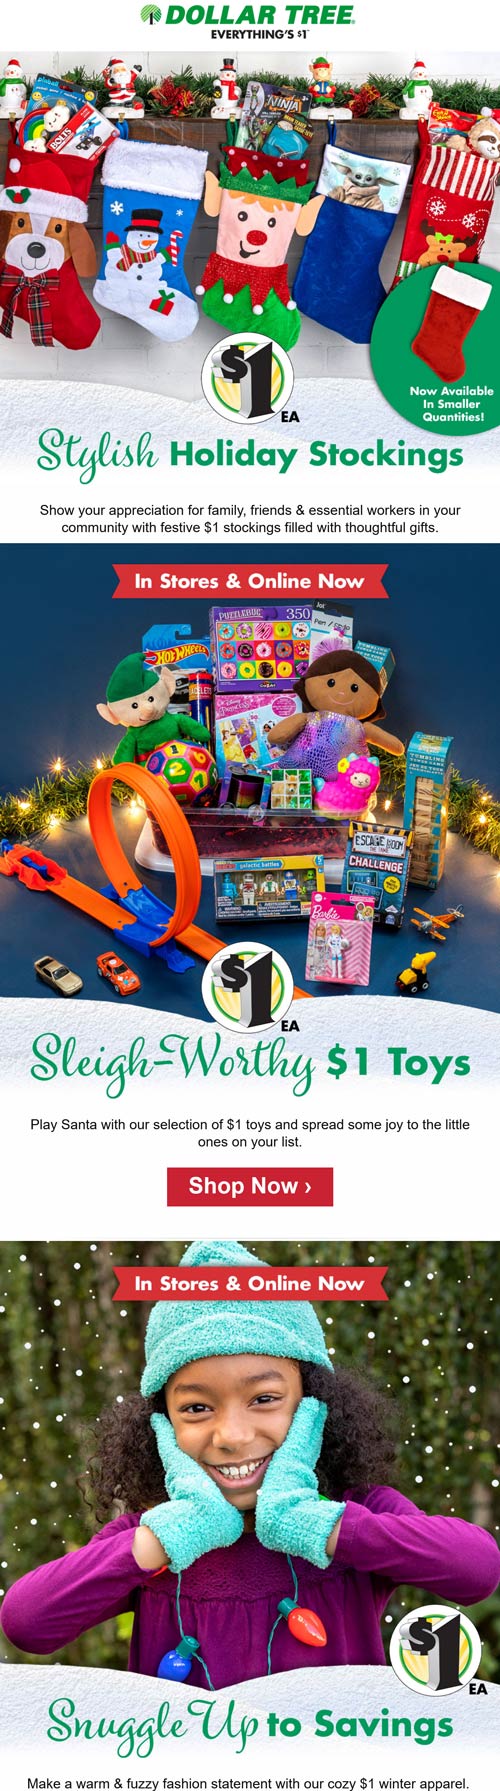 Dollar Tree stores Coupon  $1 holiday stockings, toys & apparel in stock at Dollar Tree, ditto online #dollartree 